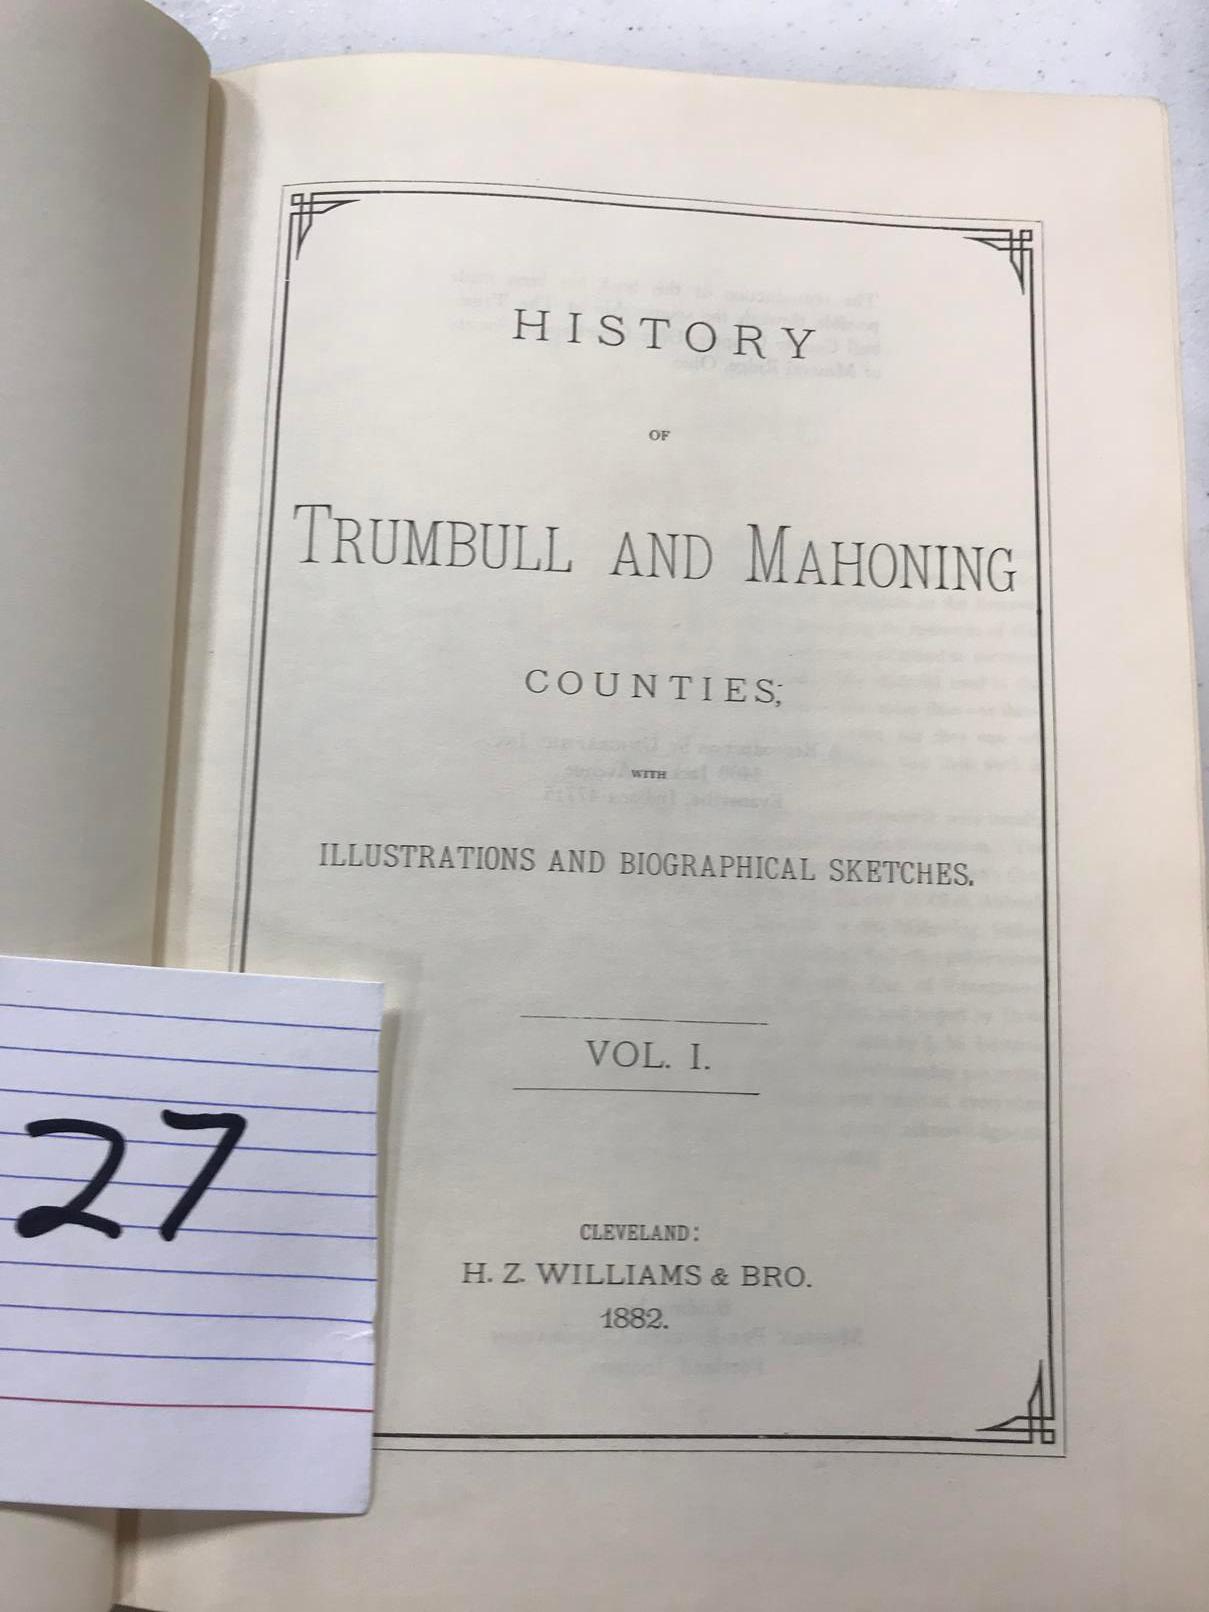 History Of Trumbull And Mahoning Counties, Vol 1&2, 1882 Reproduction, C. 1972, Unigraphic Inc